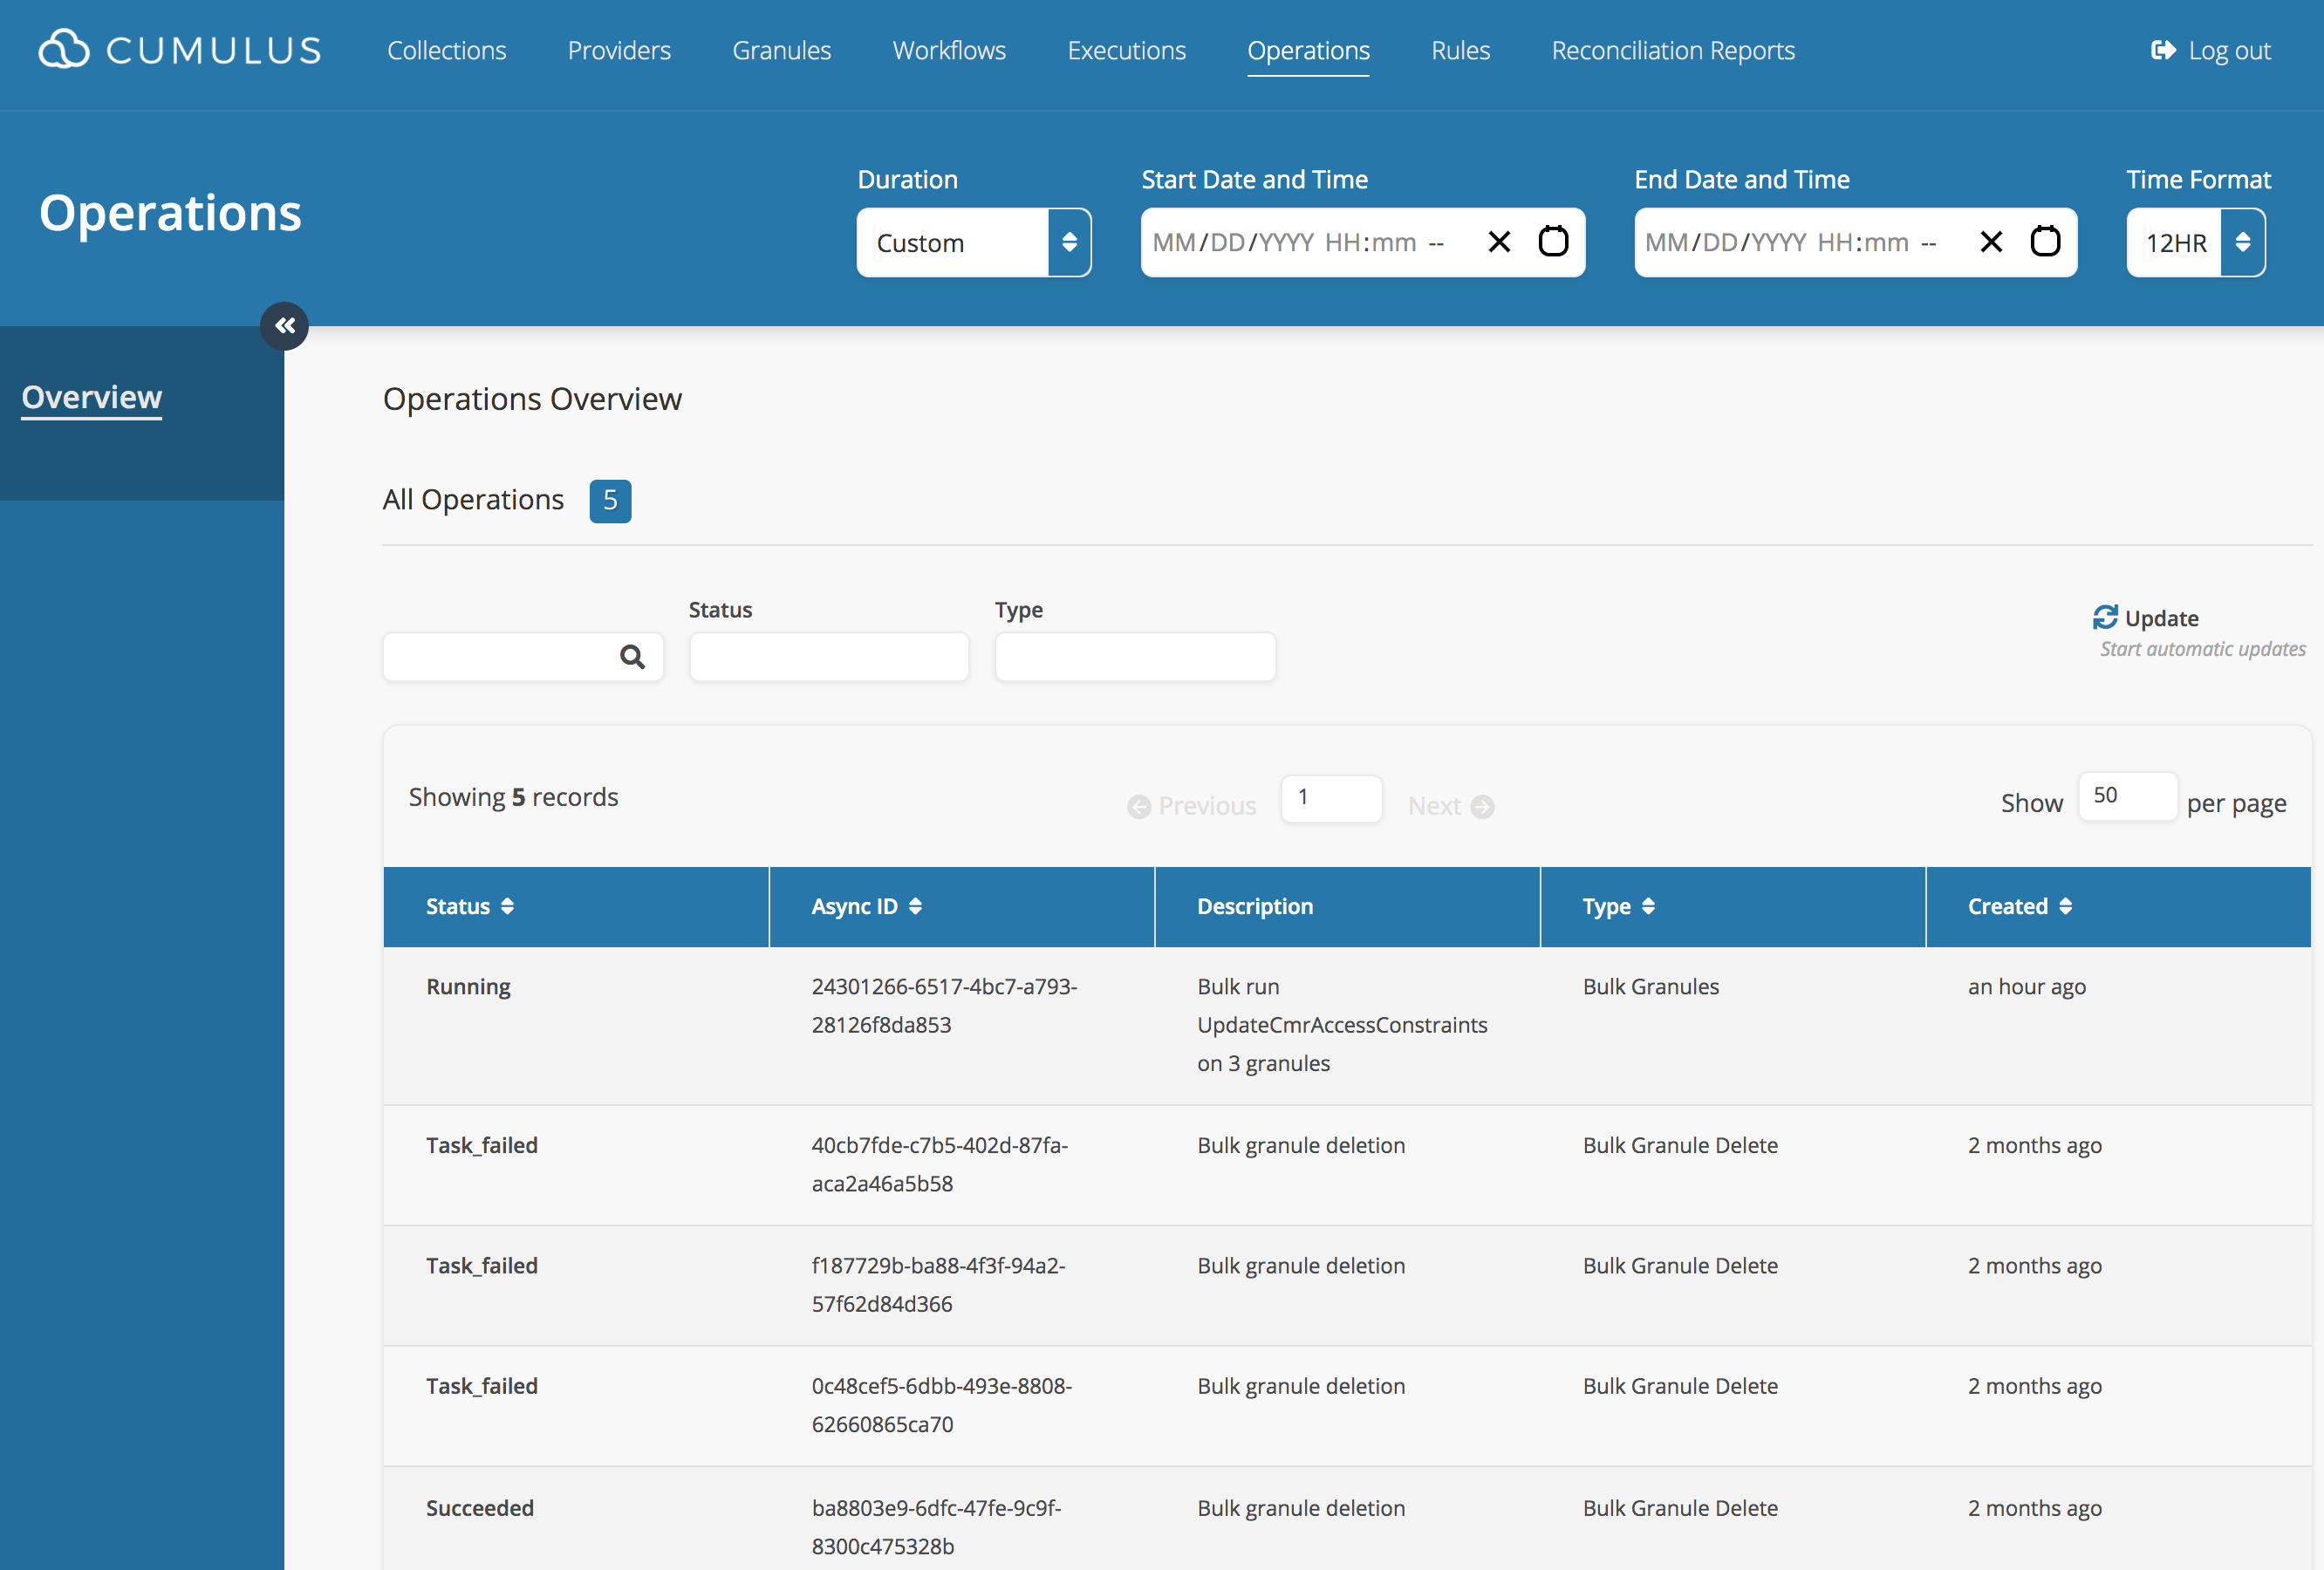 Screenshot of Cumulus Dashboard Operations Page showing 5 operations and their status, ID, description, type and creation timestamp